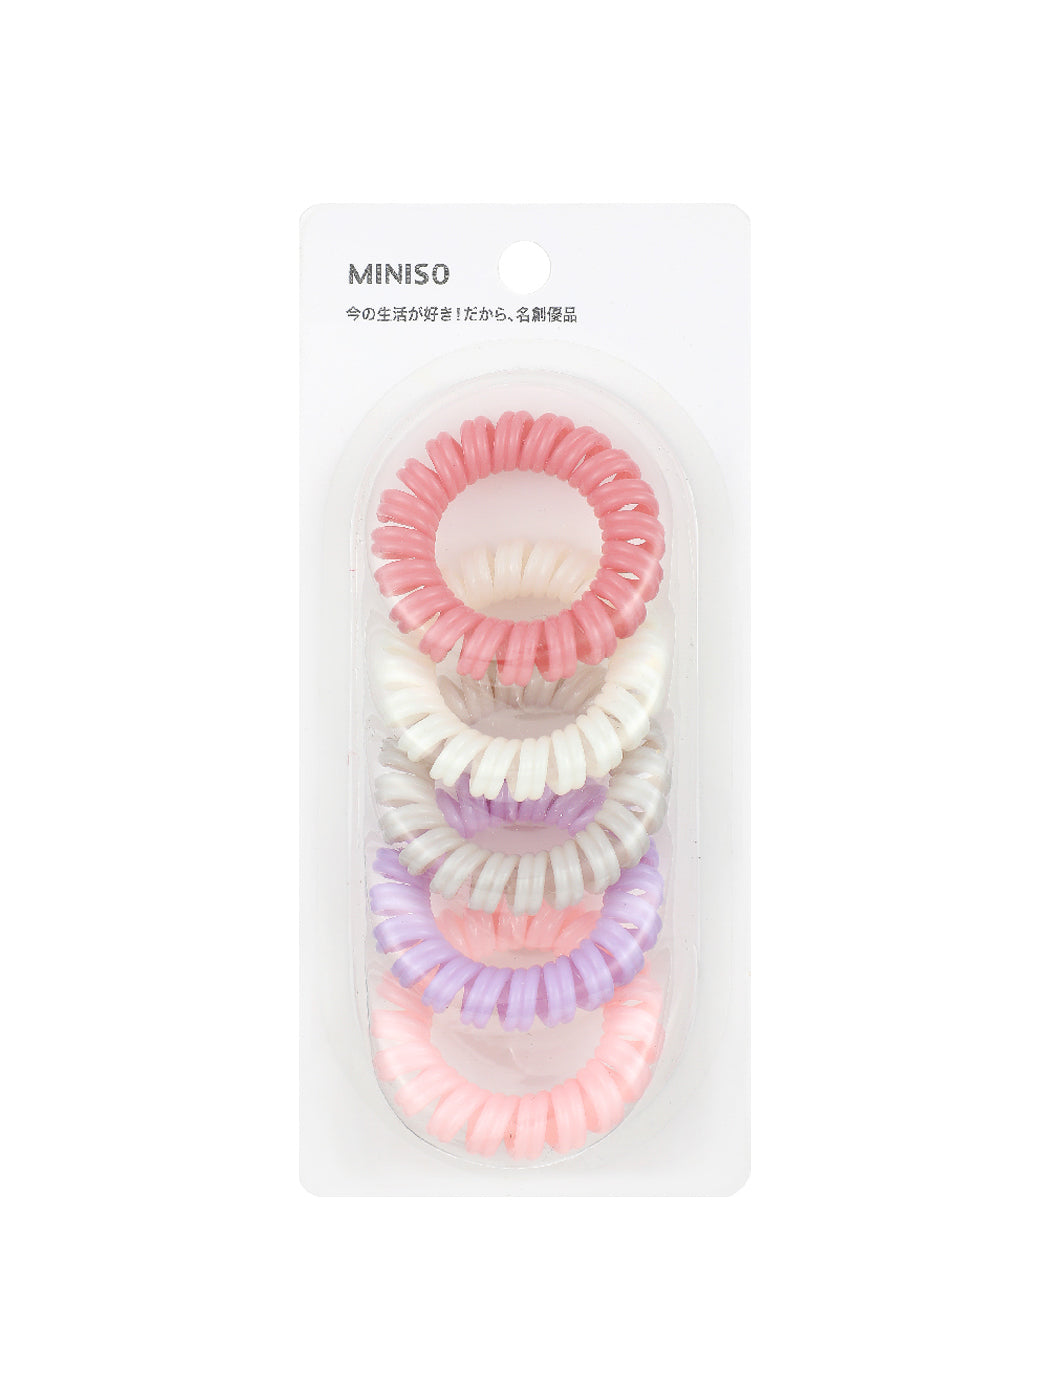 MINISO 4.5 COLORED SPIRAL HAIR TIES (5PCS) 2007225410100 HAIR TIE